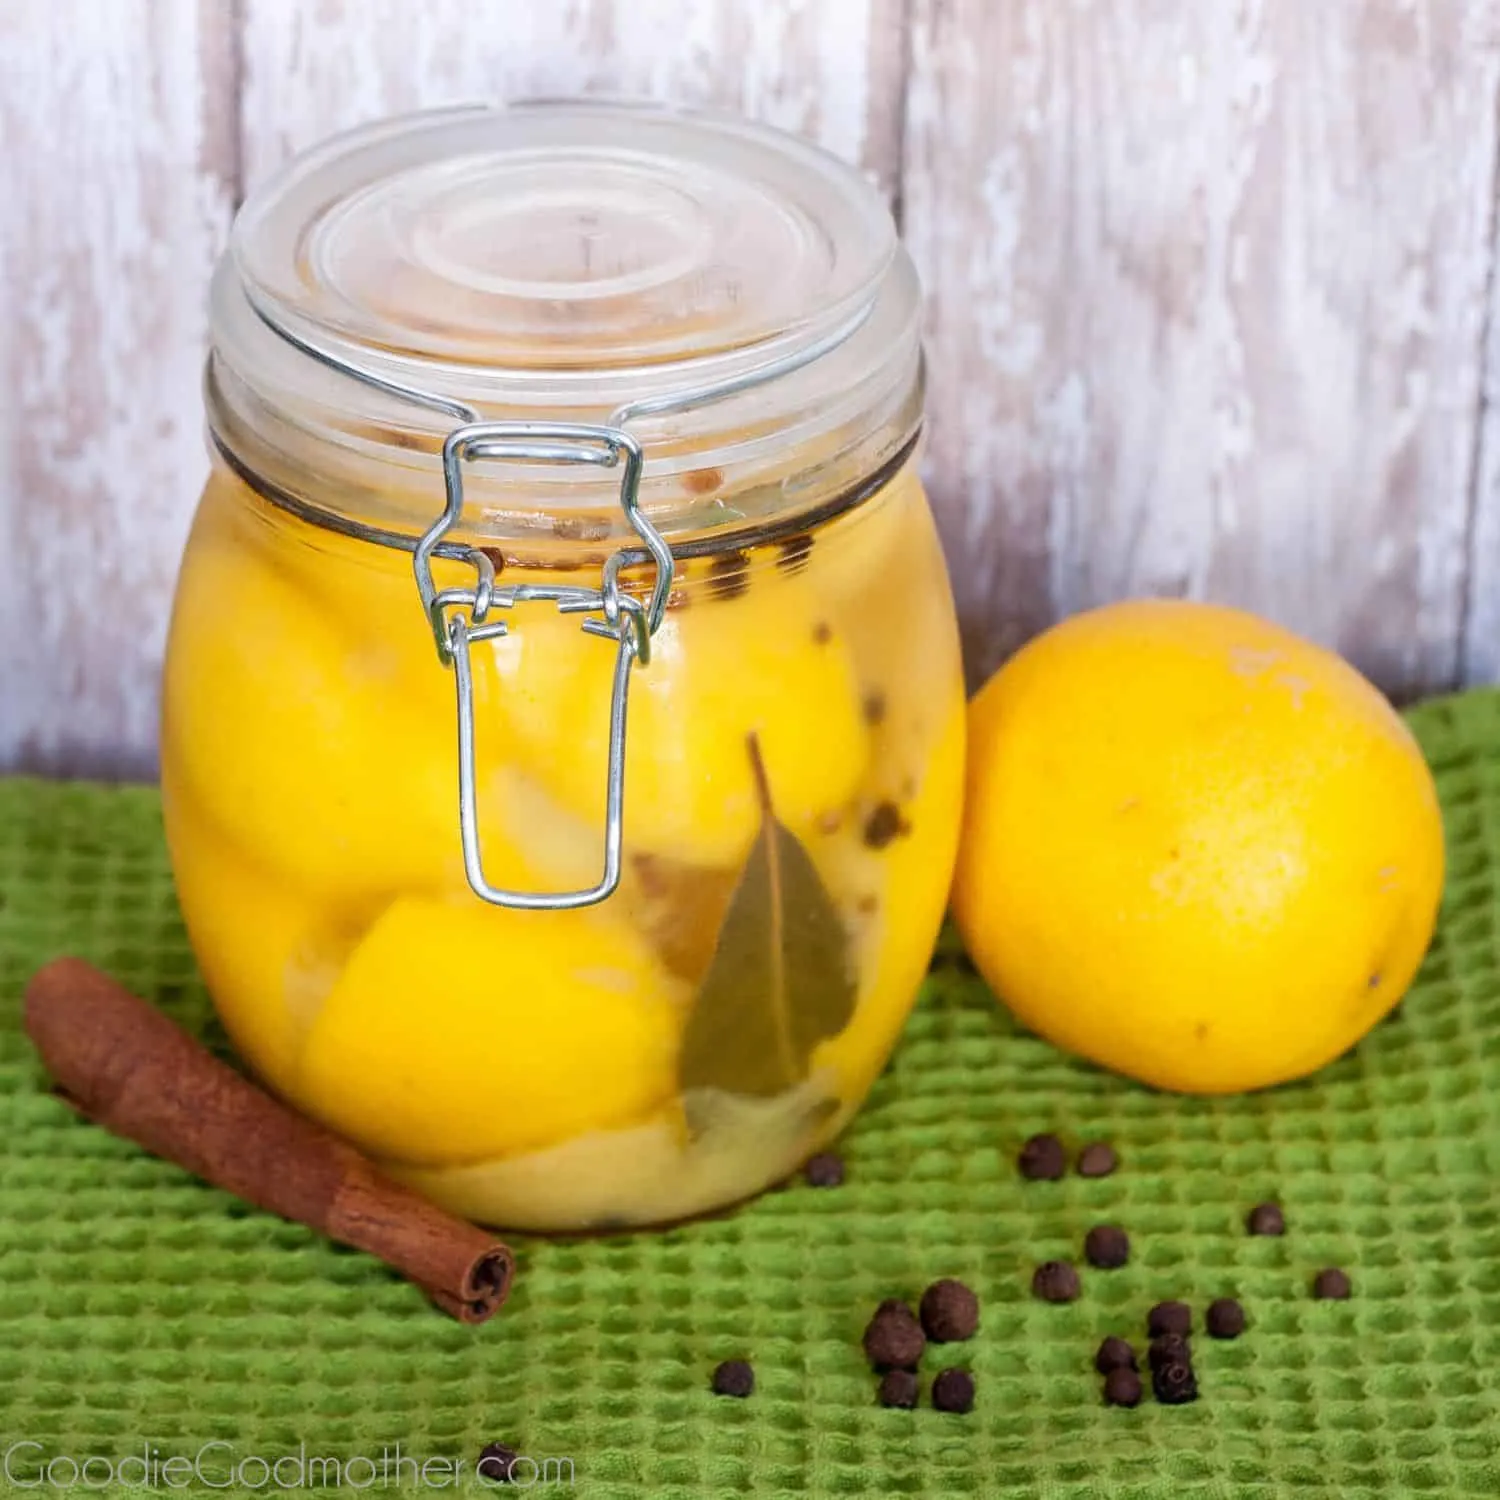 How to preserve lemons. Preserved lemons are the savory condiment you never knew you needed, and then can't live without!